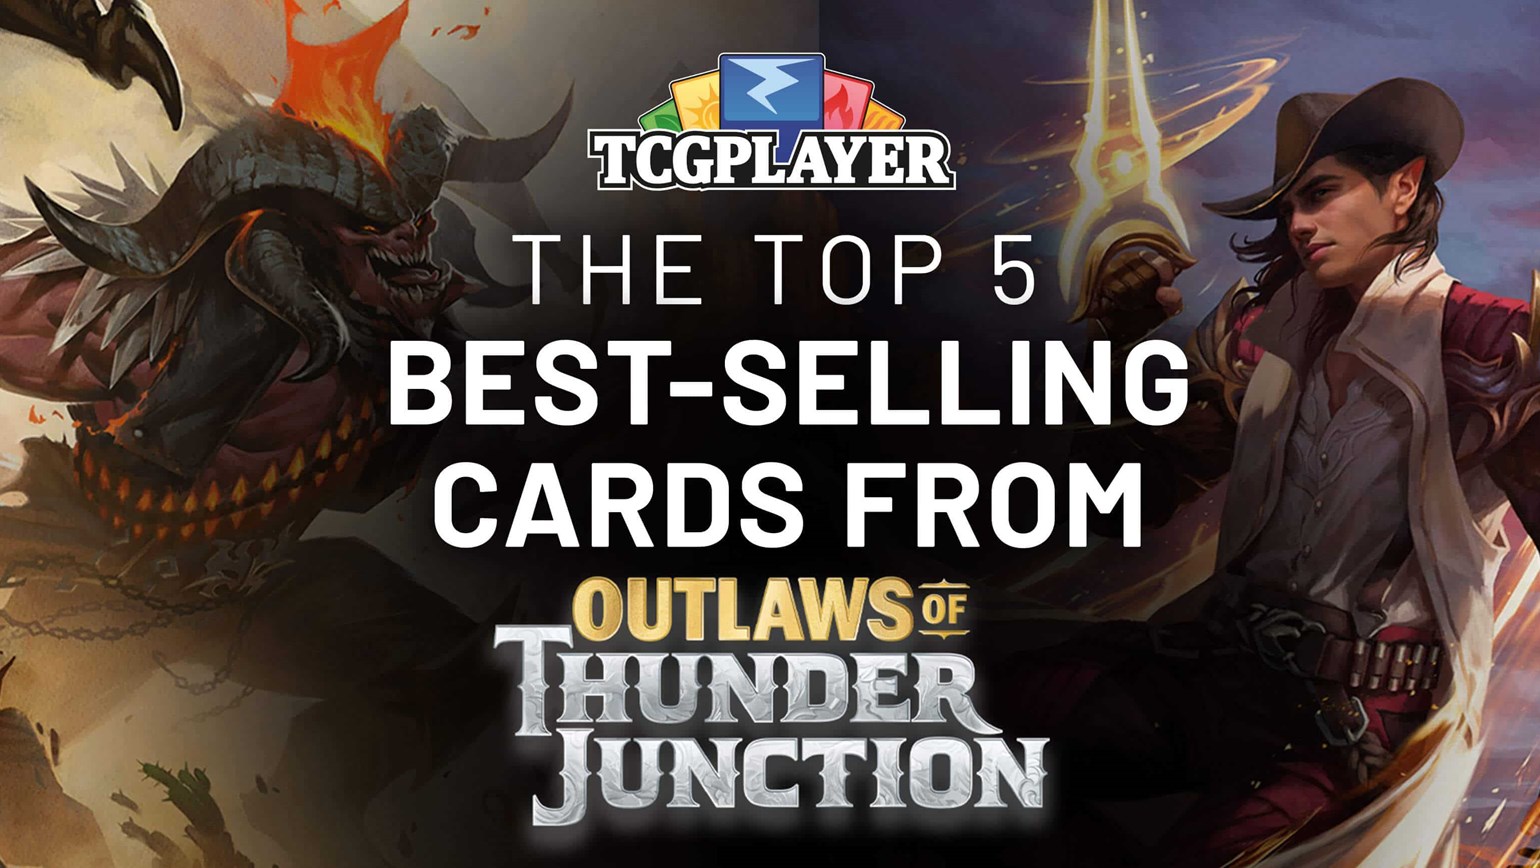 The Top 5 Best-Selling Cards of Outlaws of Thunder Junction